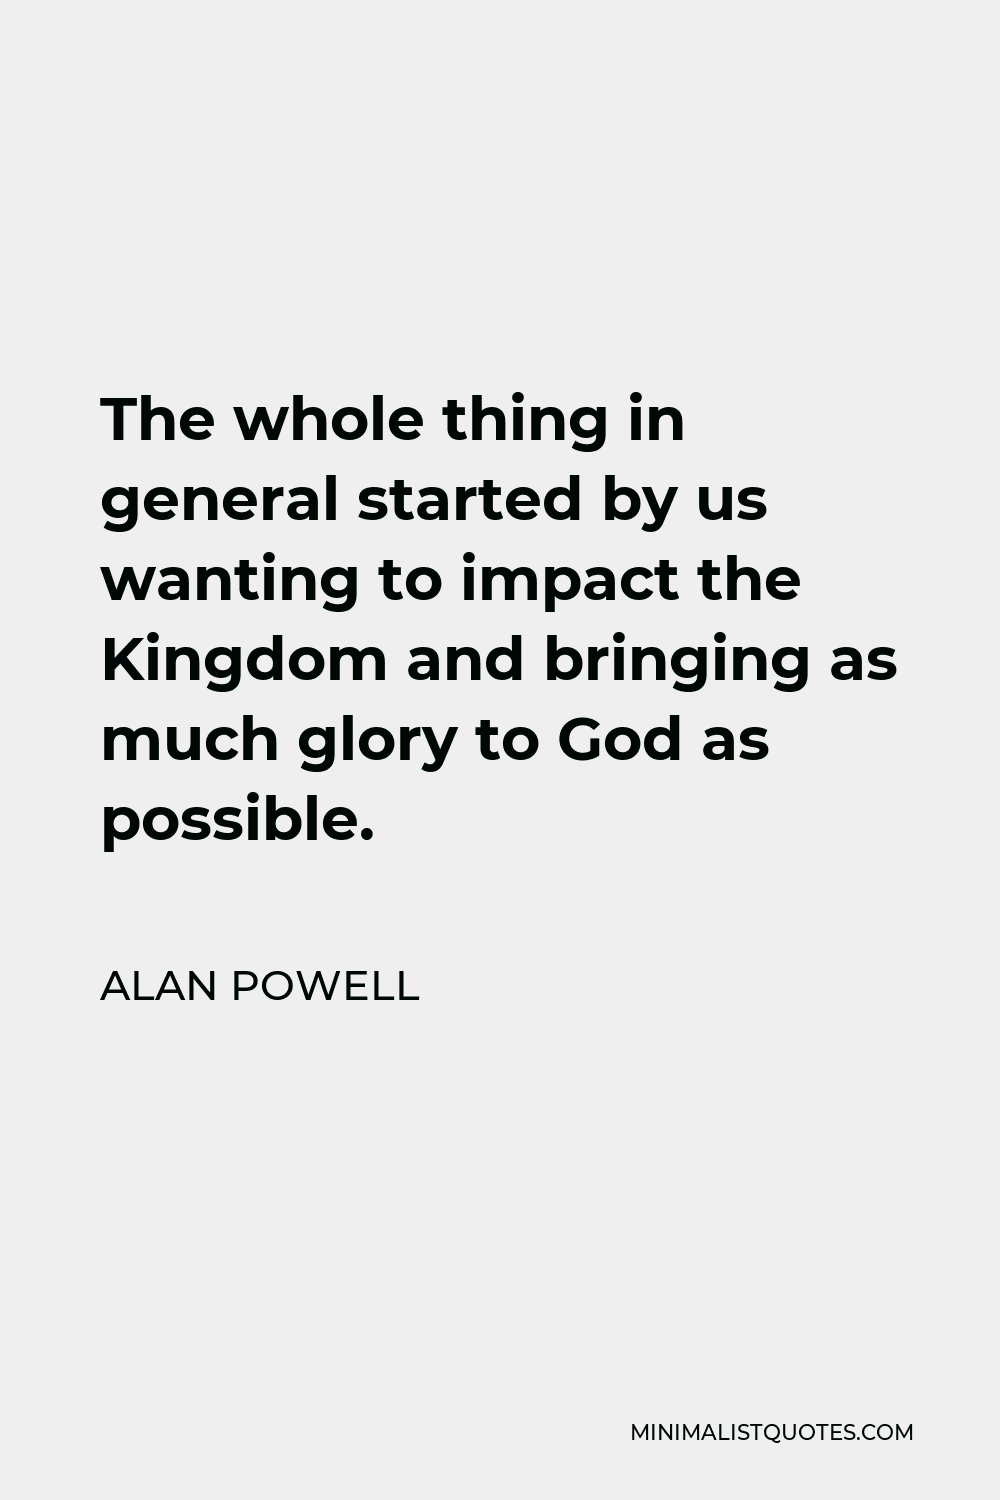 Alan Powell Quote - The whole thing in general started by us wanting to impact the Kingdom and bringing as much glory to God as possible.